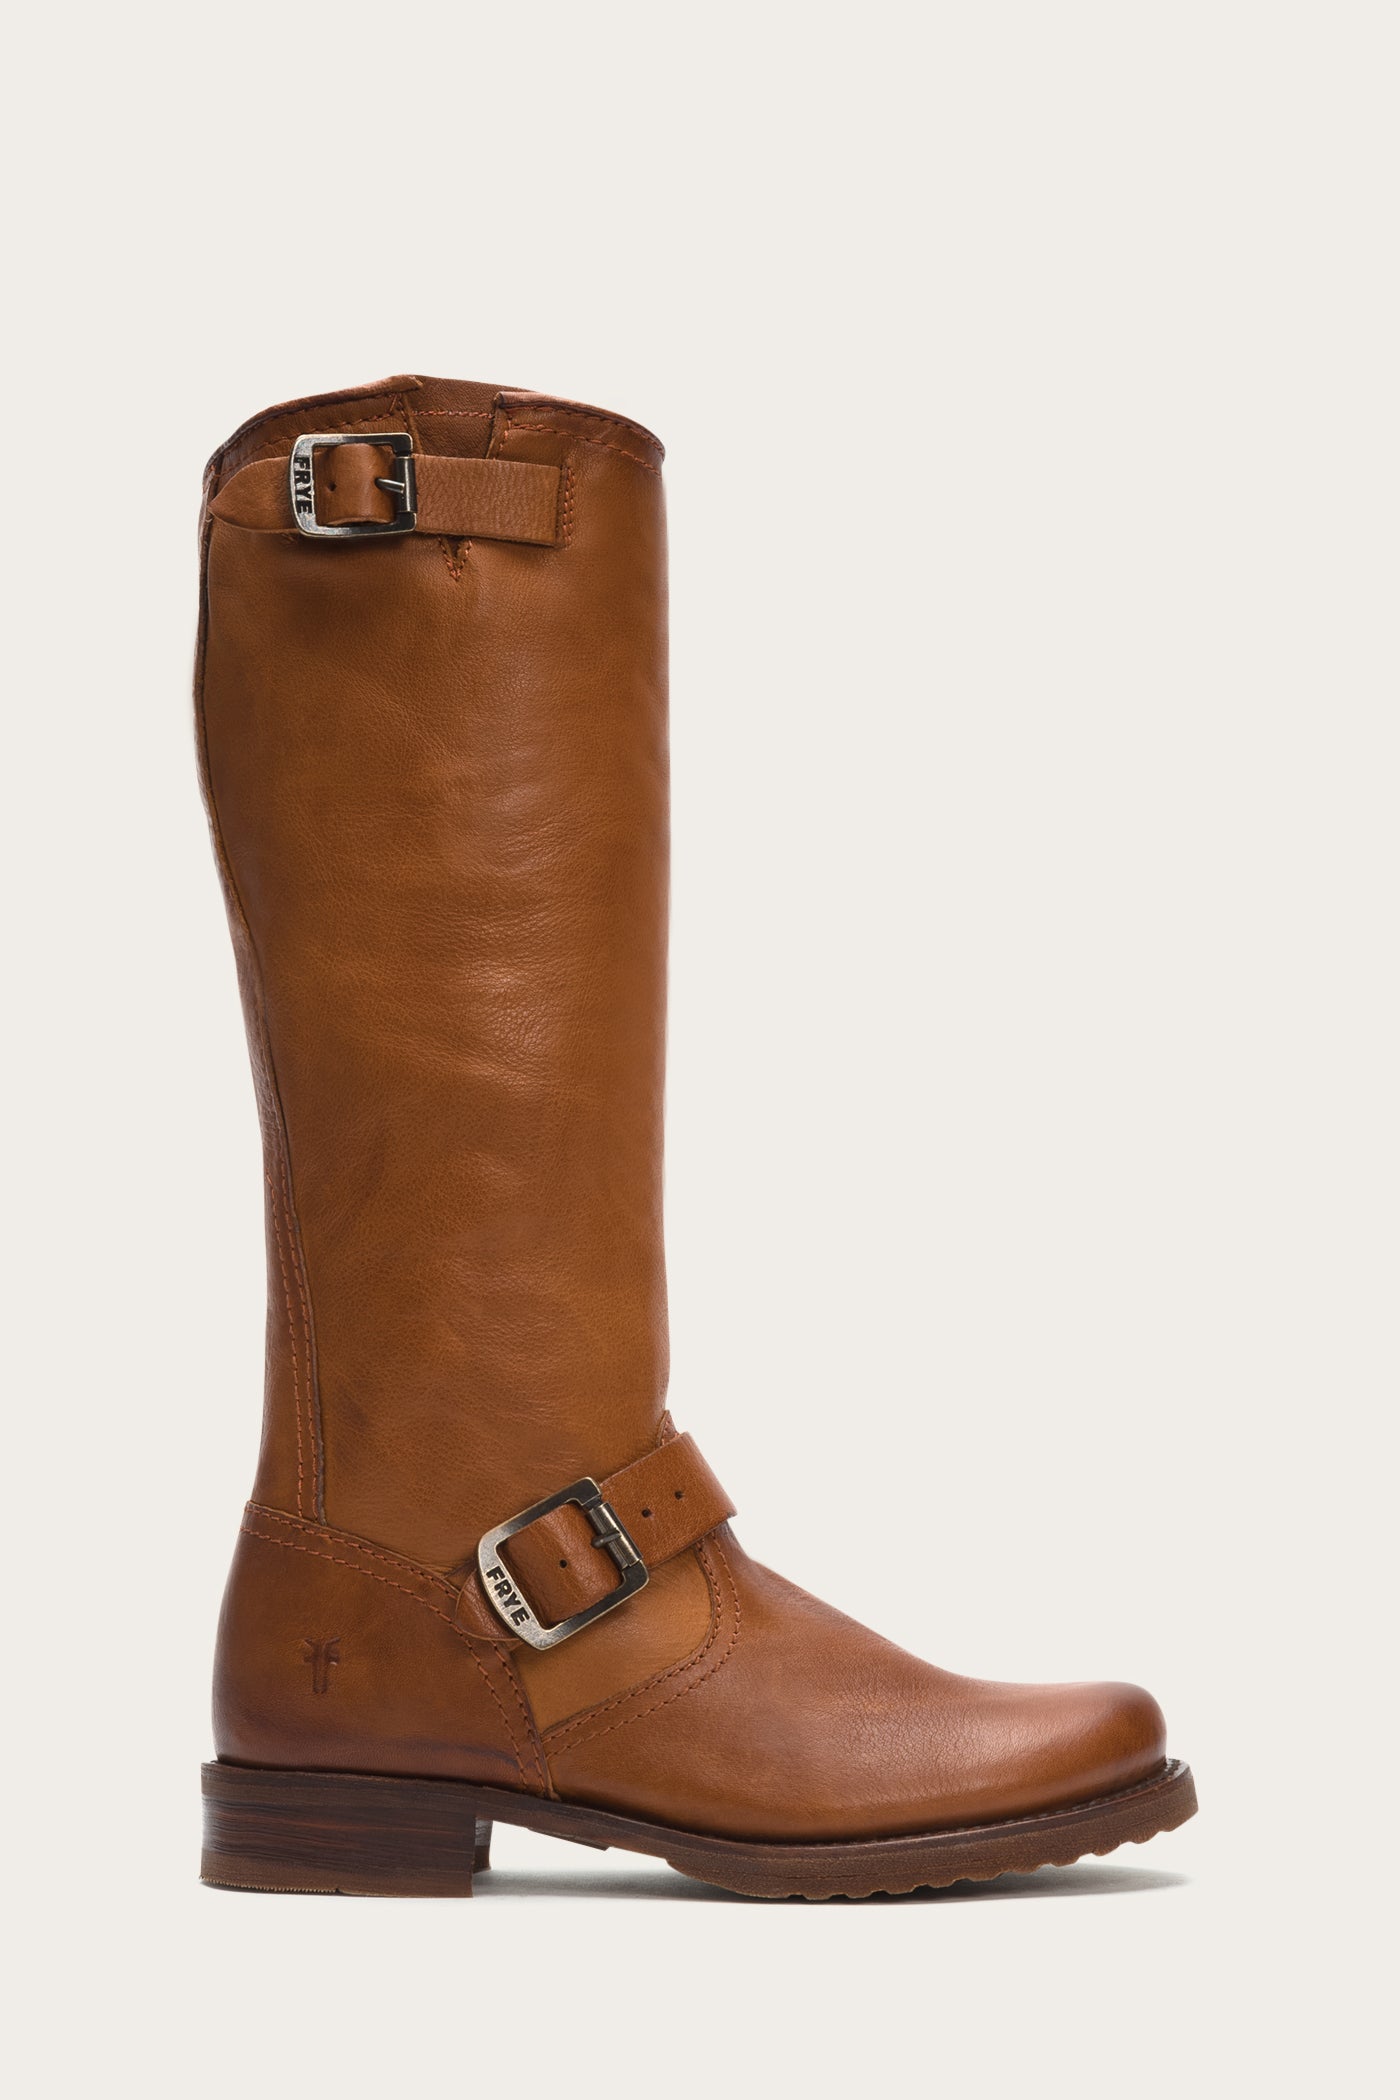 frye riding boots brown